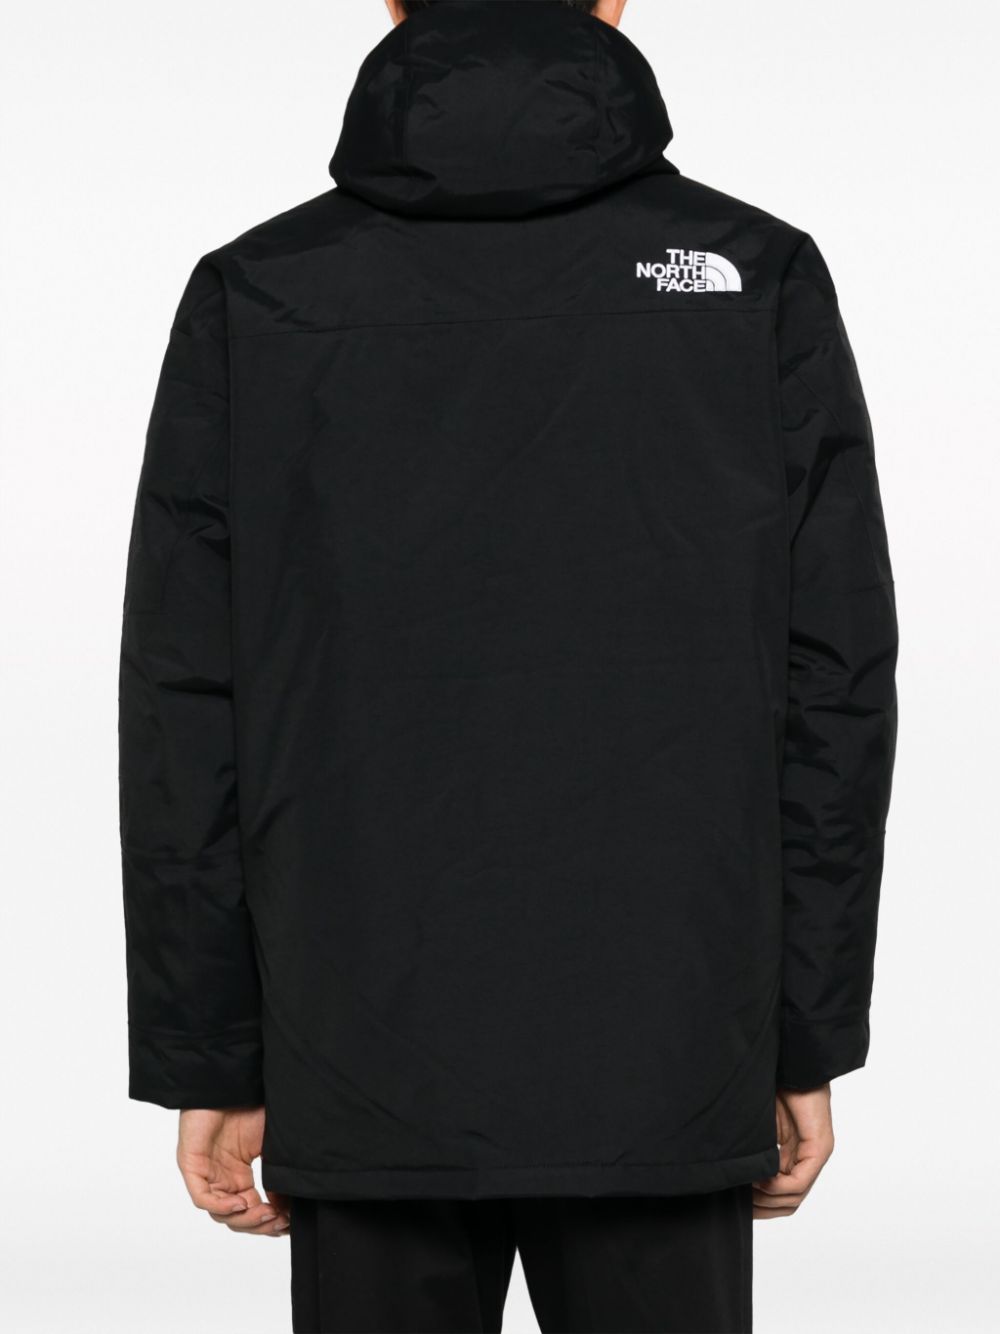 The North Face Mens Coldworks Insulated Winter Parka Black